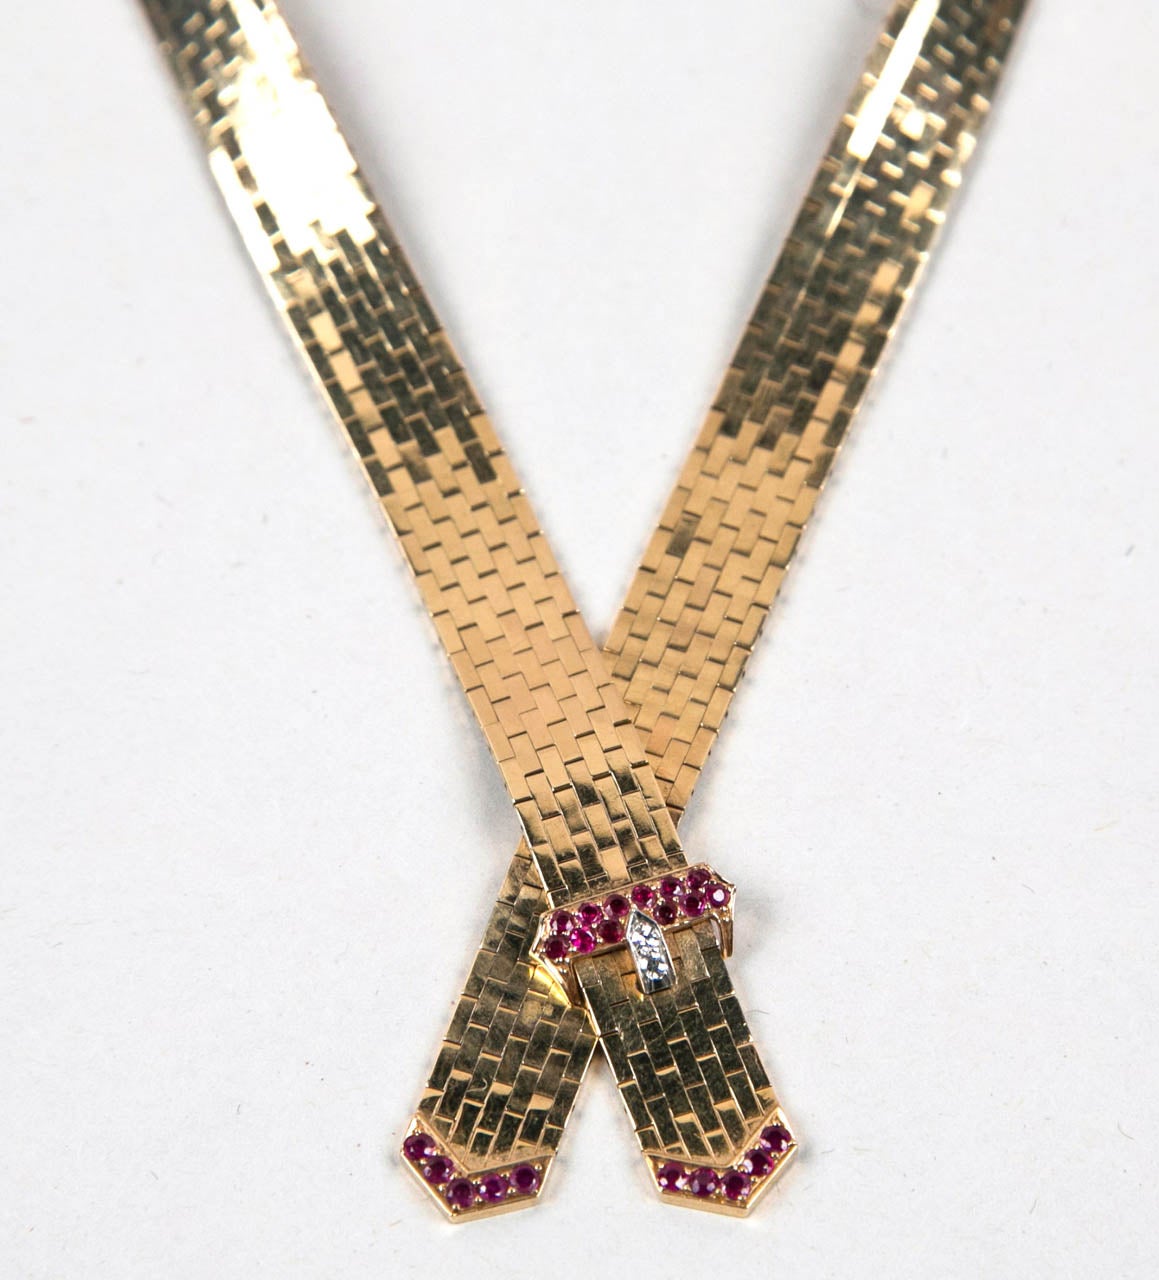 1940's Gold, Ruby and Diamond Necklace and Earring Set Presented by Carol Marks 2